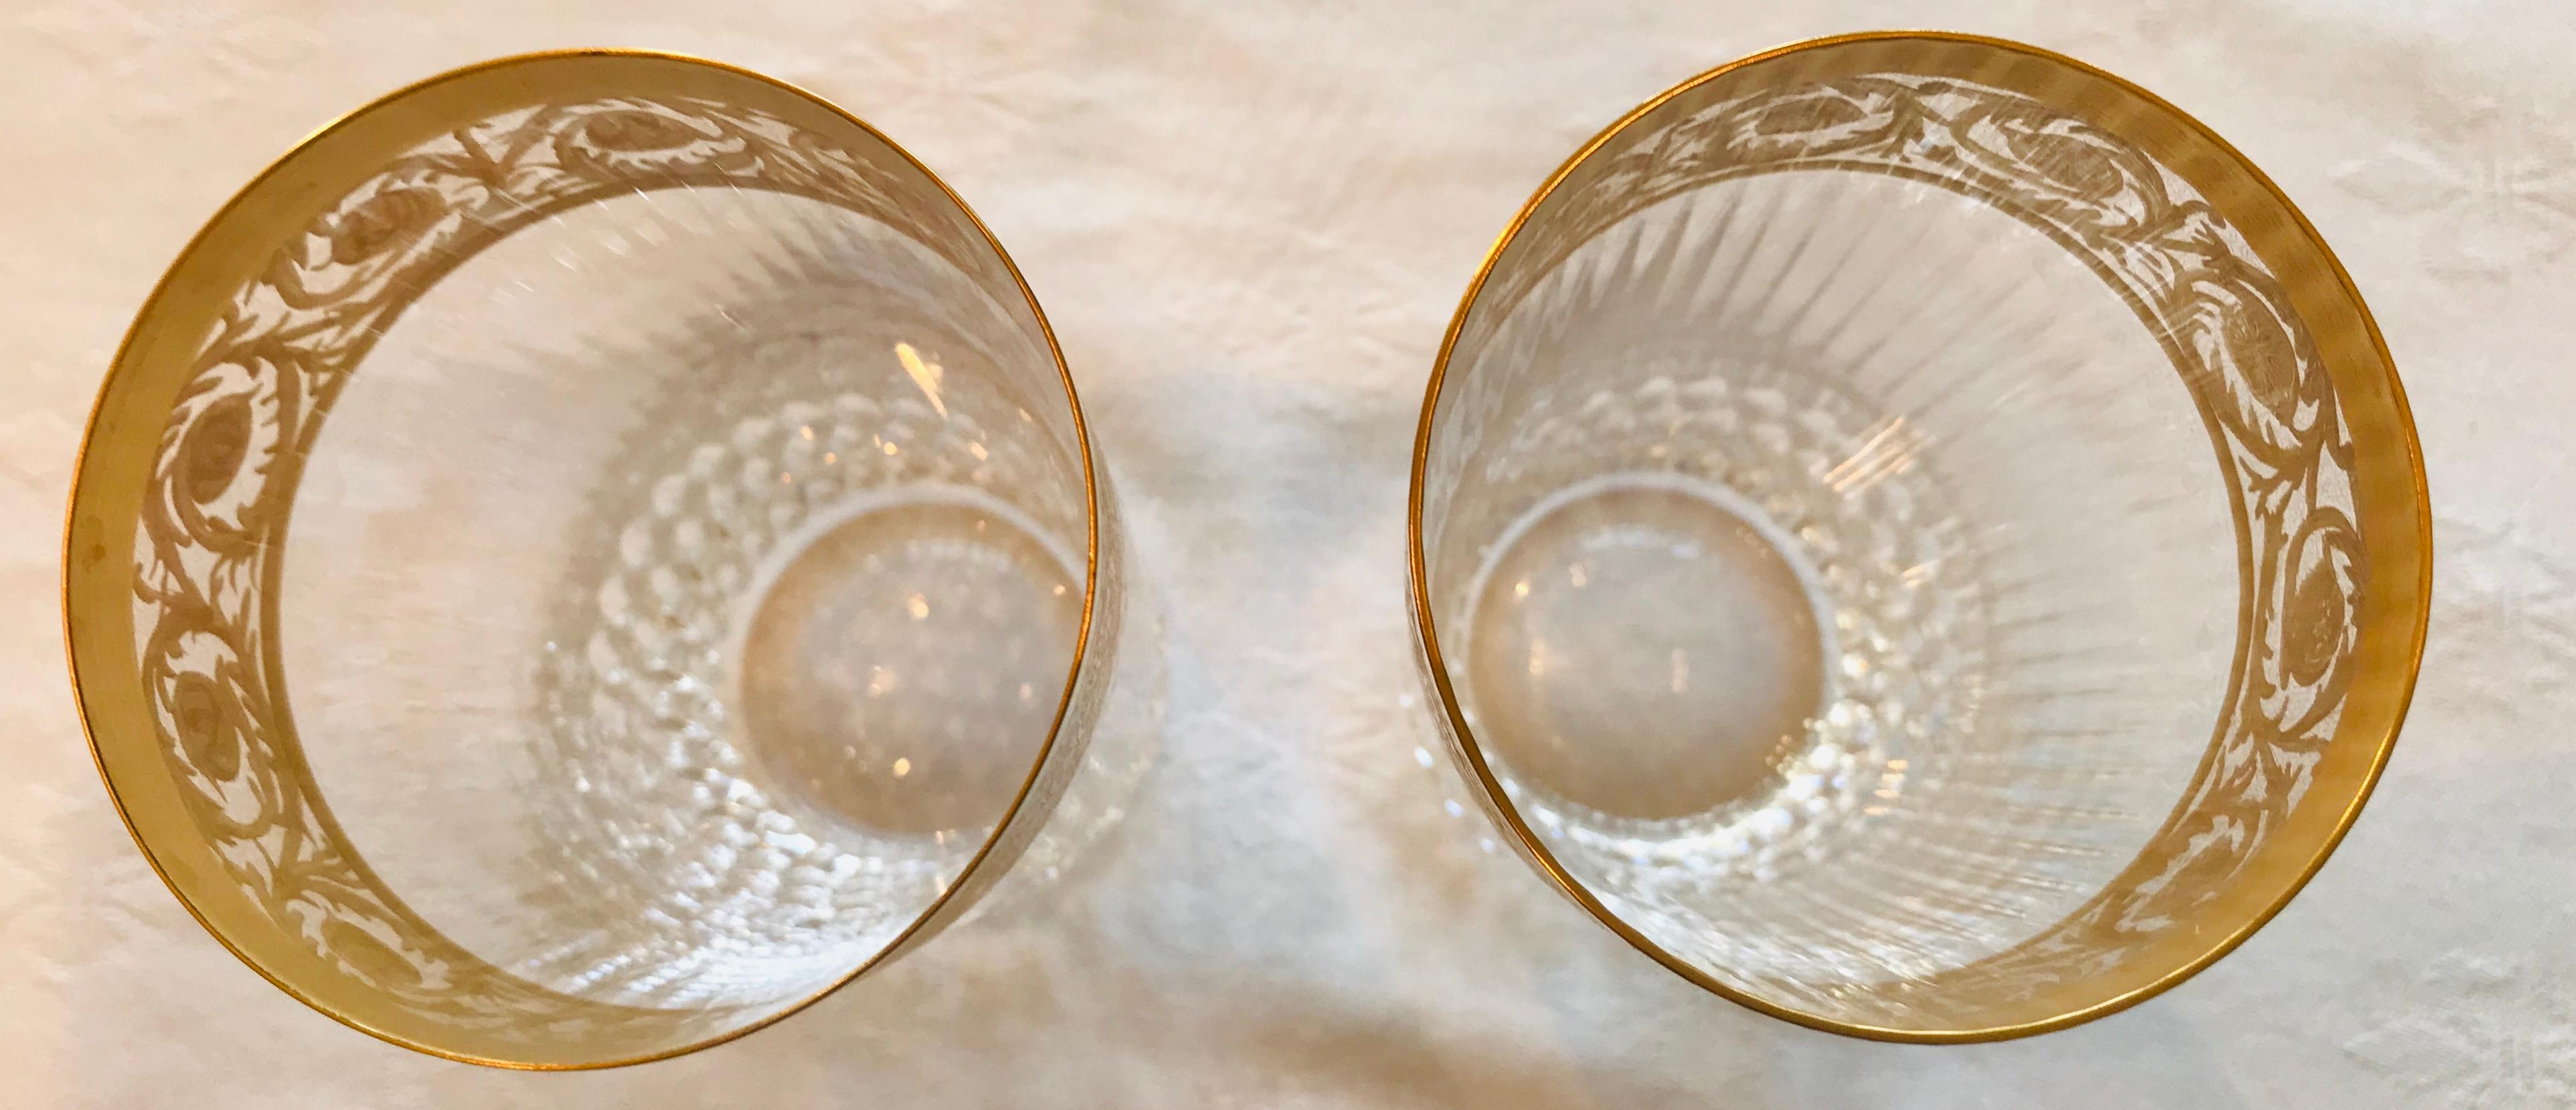 Saint Louis Crystal Gold Thistle Fluted Highball Tumblers, Set of 2 In Good Condition For Sale In South Newfane, VT